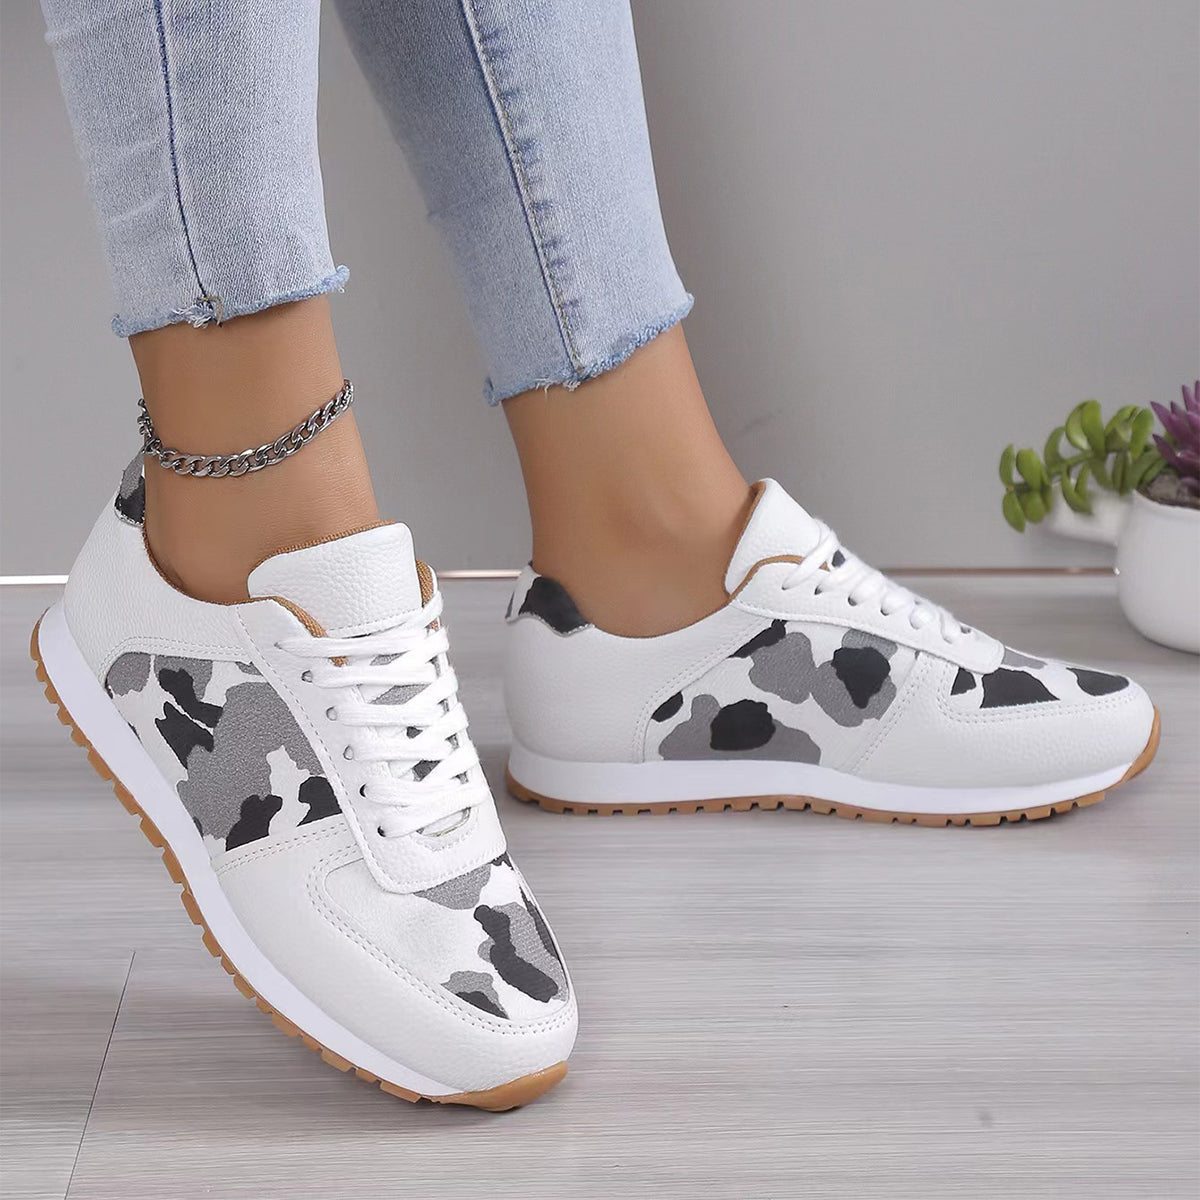 Fashoin Leopard Print Lace-up Sports Shoes For Women Sneakers Casual Running Walking Flat Shoes - ROMART GLOBAL LTD